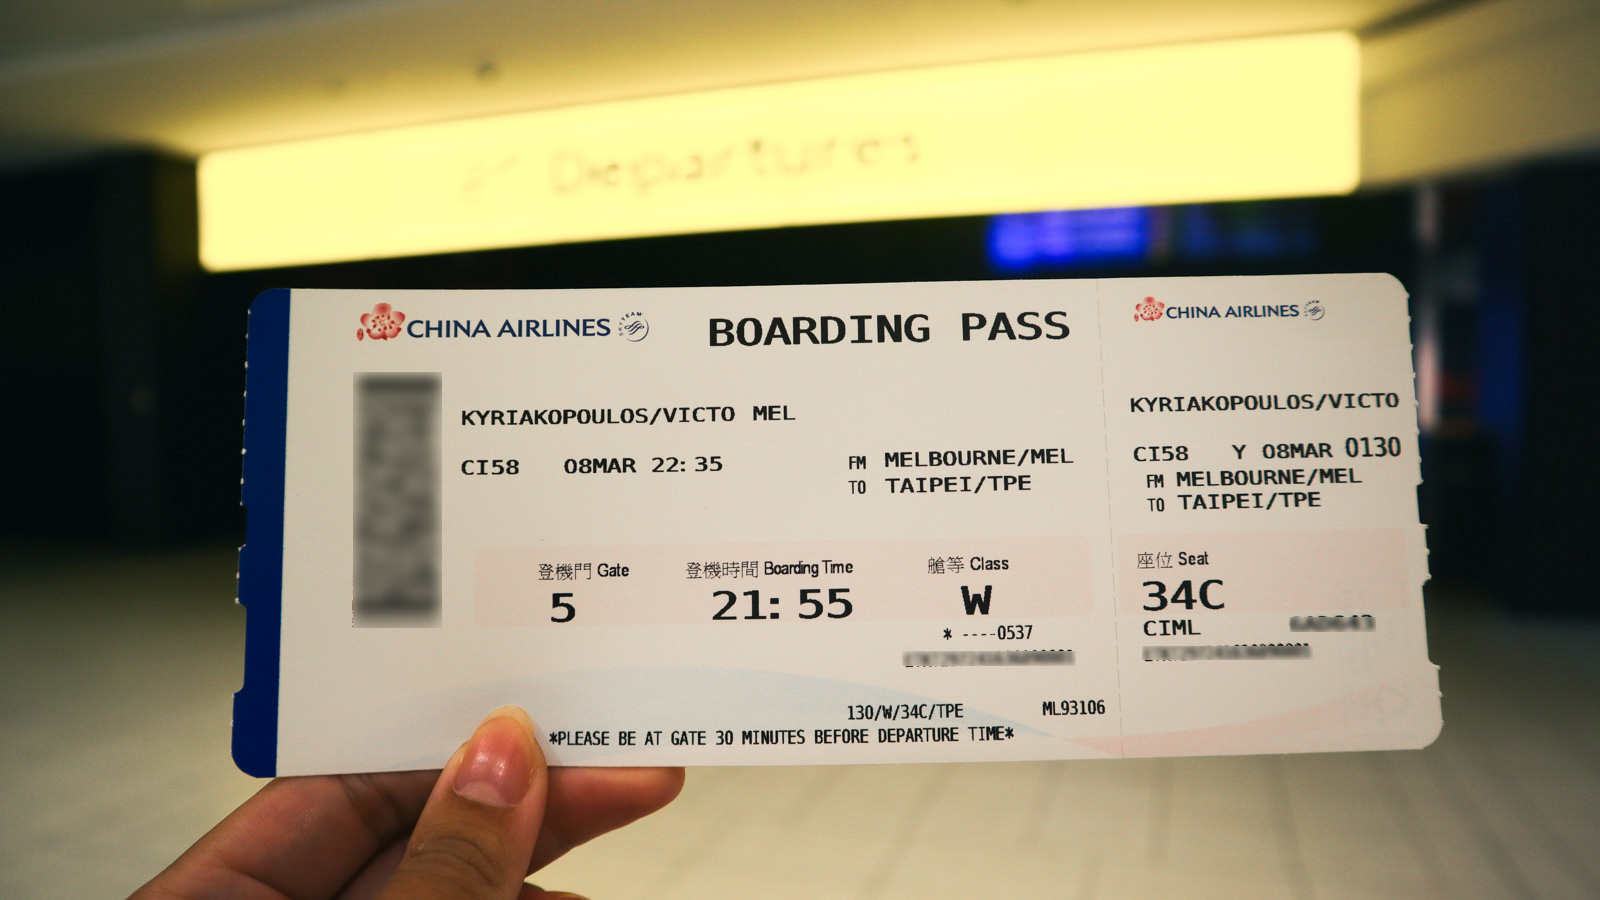 China Airlines Premium Economy boarding pass, Melbourne Airport